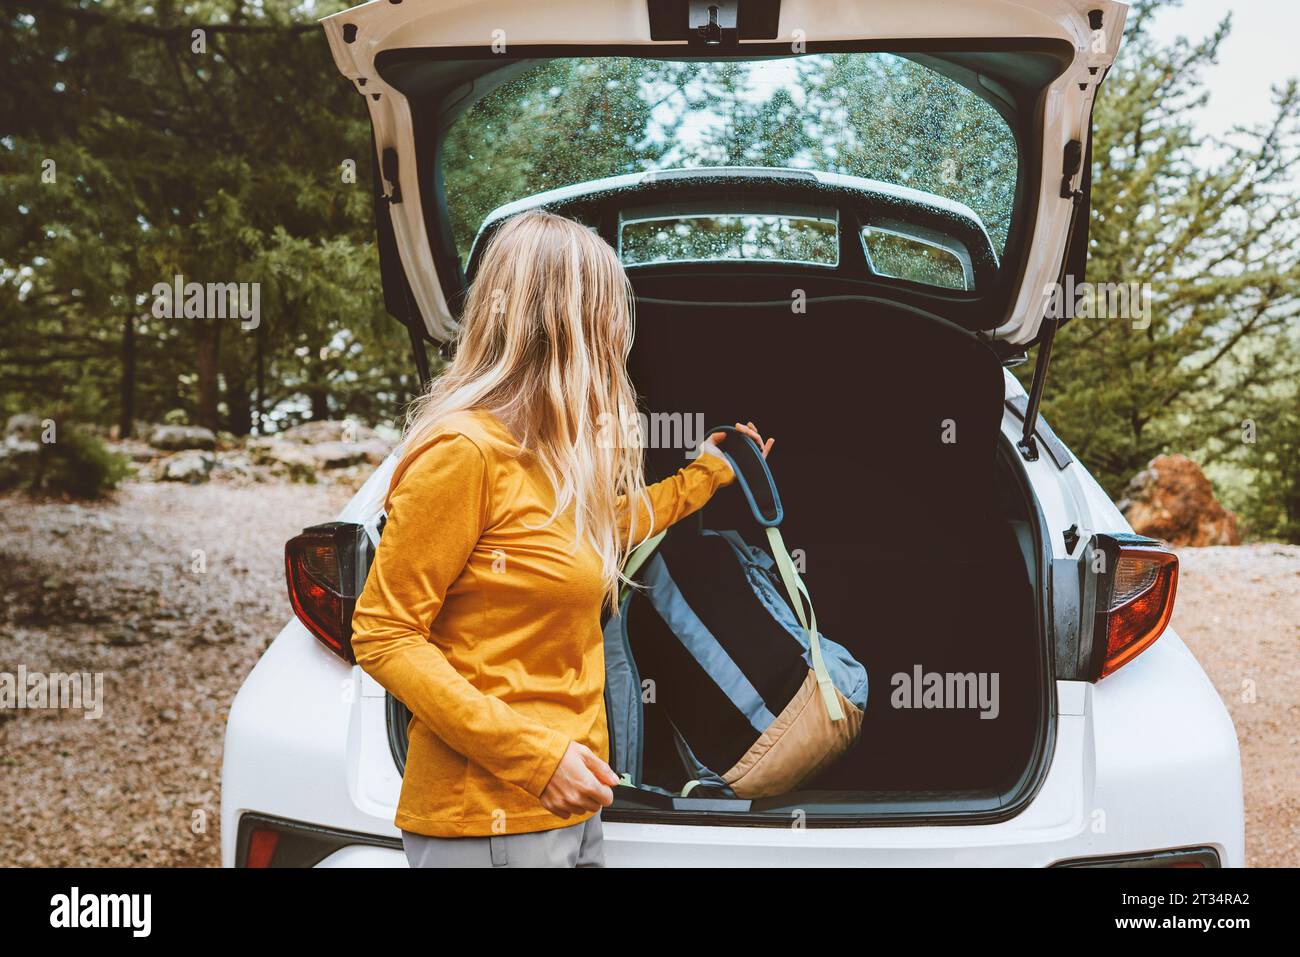 Woman puts backpack in a car trunk road trop vacations travel active lifestyle outdoor rental auto Stock Photo